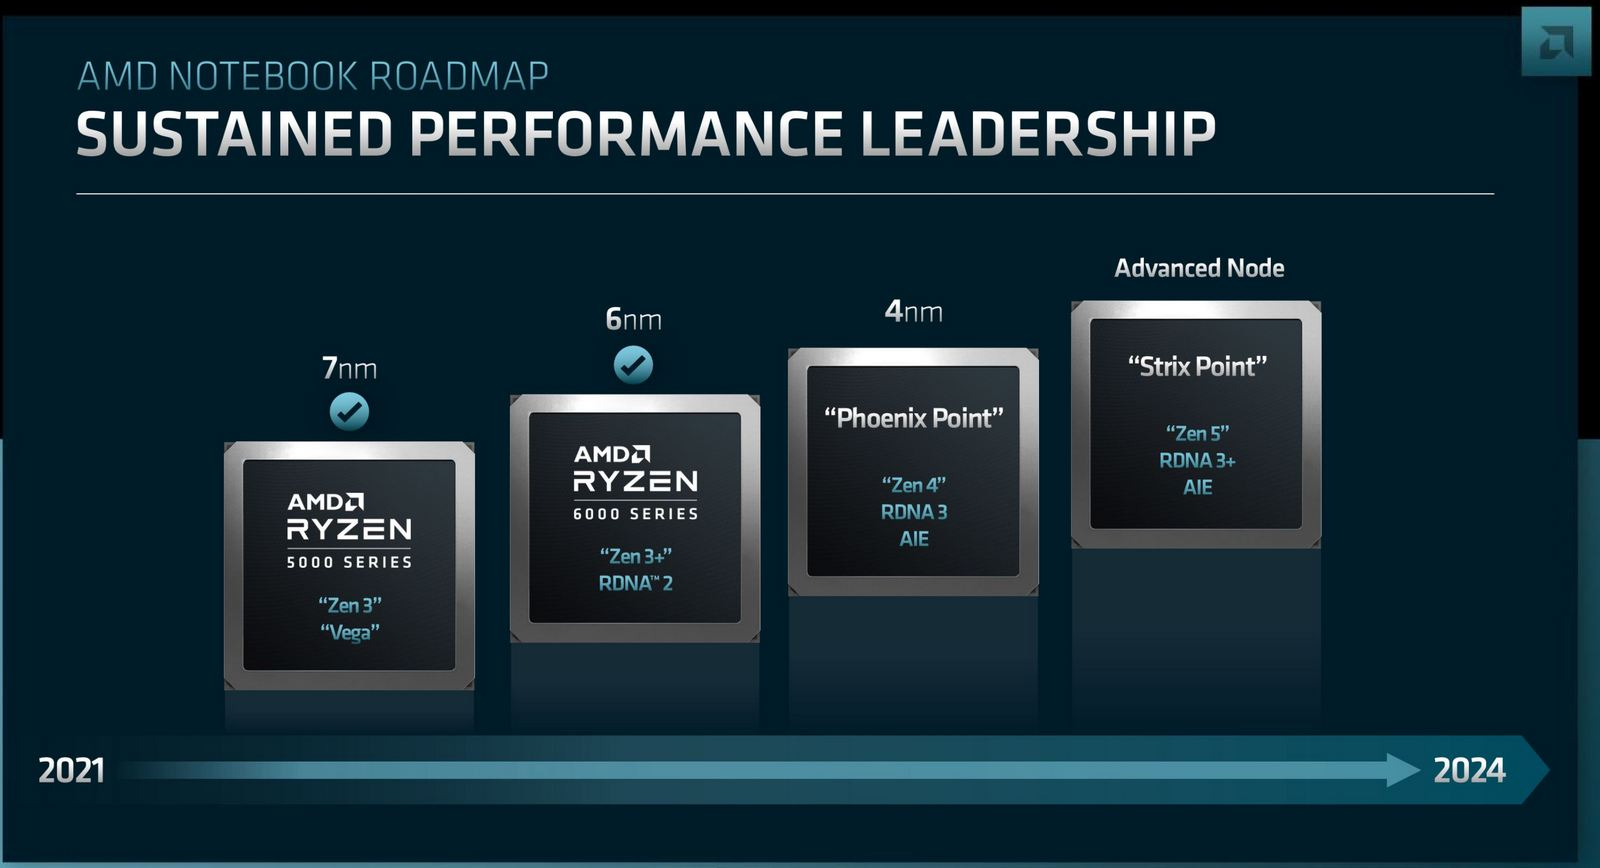 AMD will release 4nm mobile processors with Zen 4 and RDNA 3 next year, and Zen 5 and RDNA 3+ cores in 2024